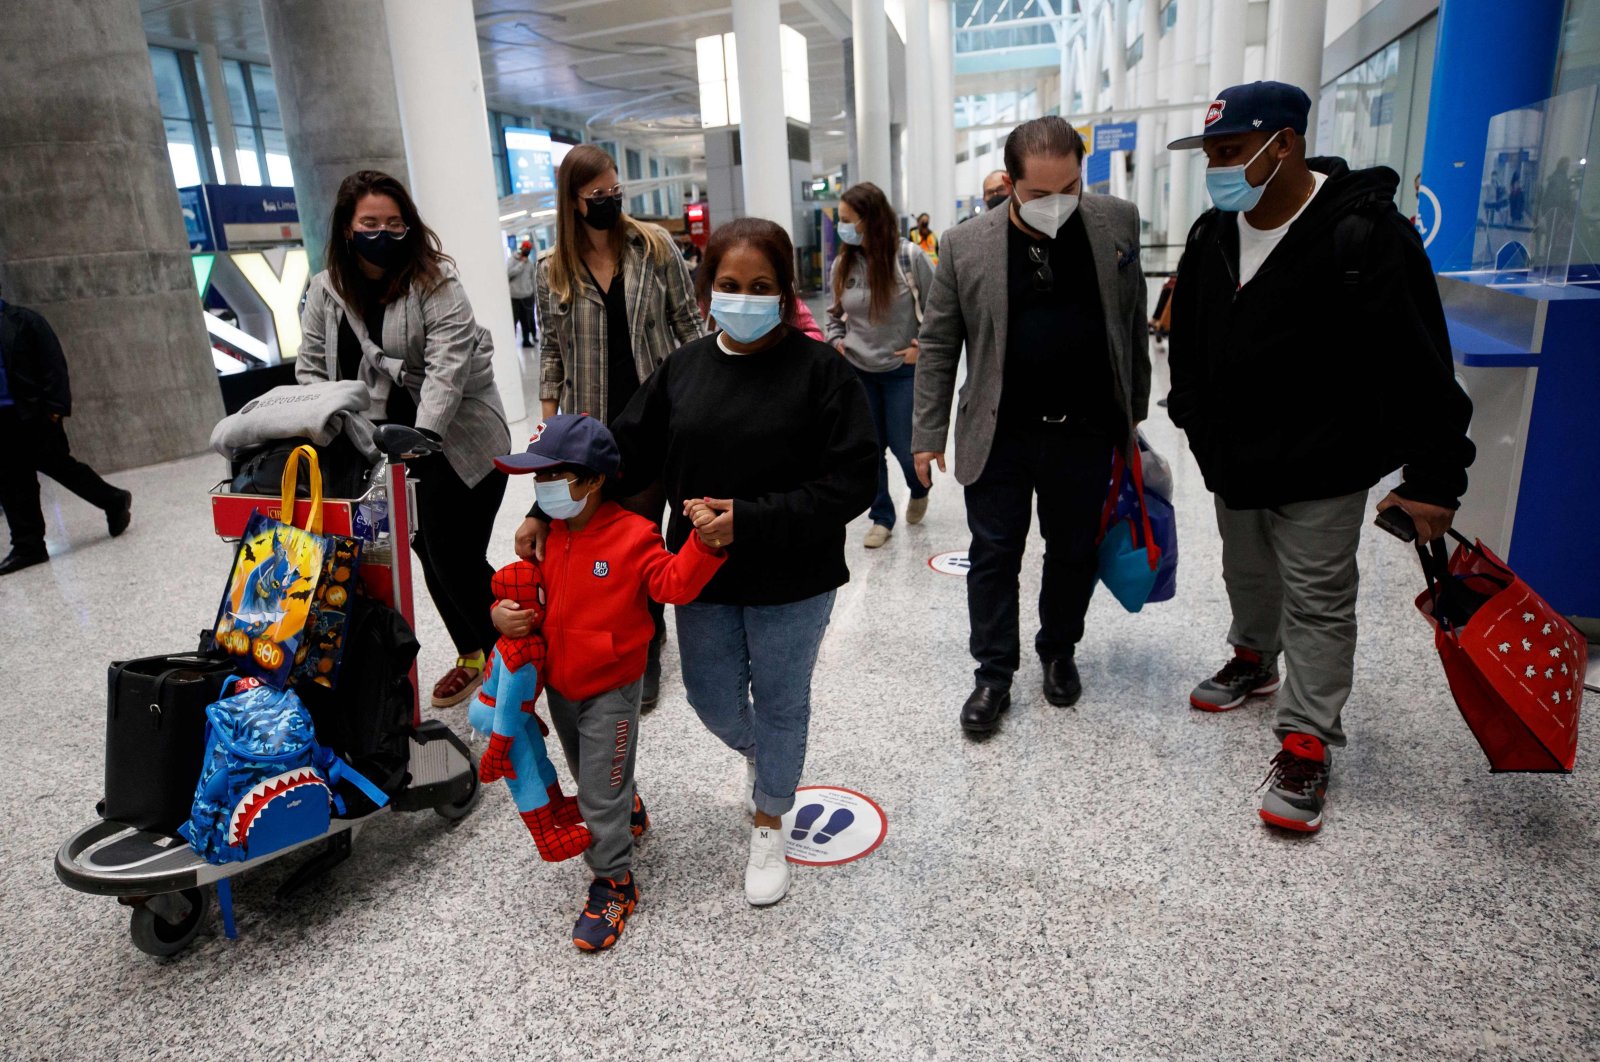 Nadeeka Dilrukshi Nonis holds the hand of her son Dinath, and Supun Thilina Kellapatha (R) speaks with lawyer Marc-Andre Seguin (2R), as they arrive in Canada as refugees at Pearson International Airport in Toronto, Ontario, Canada, Sept. 28, 2021. (AFP Photo)